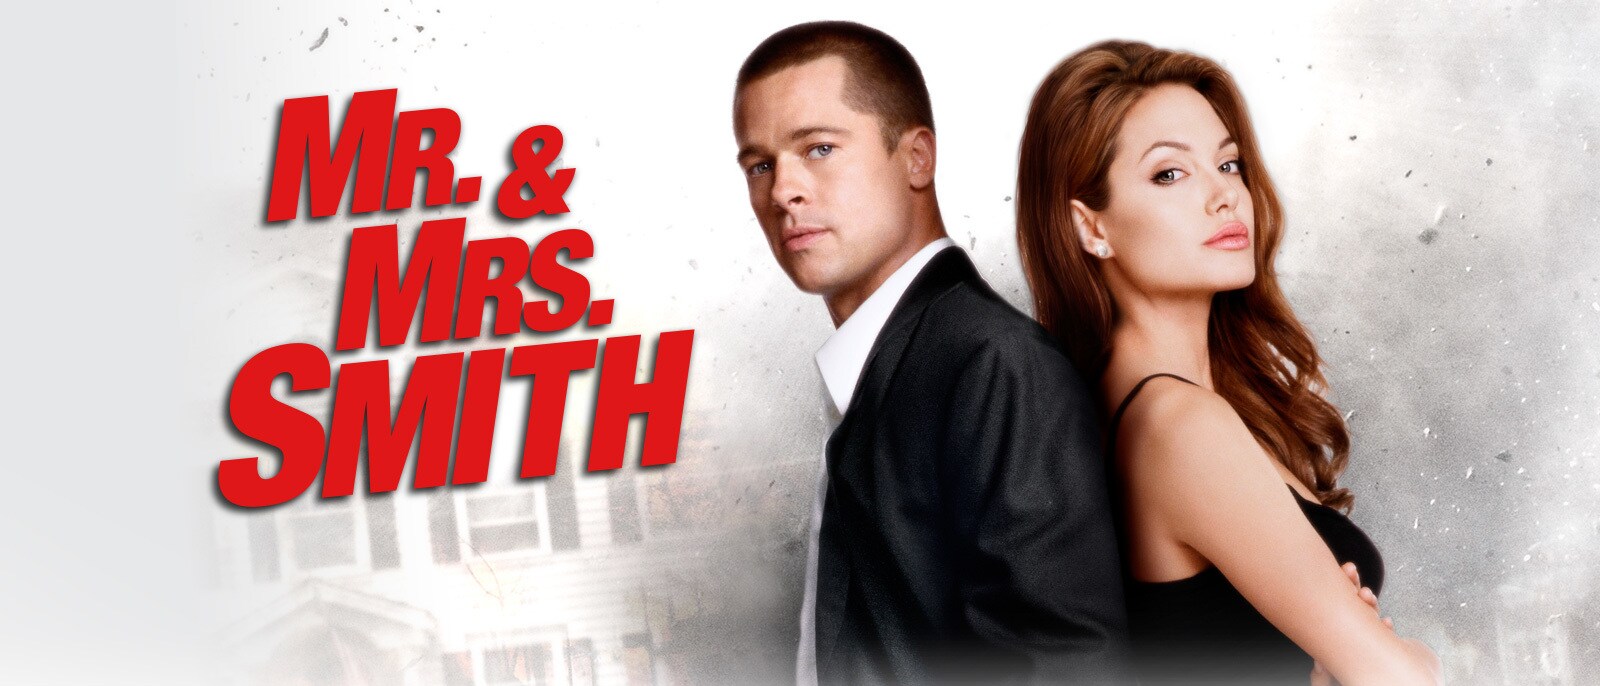 44-facts-about-the-movie-mr-mrs-smith